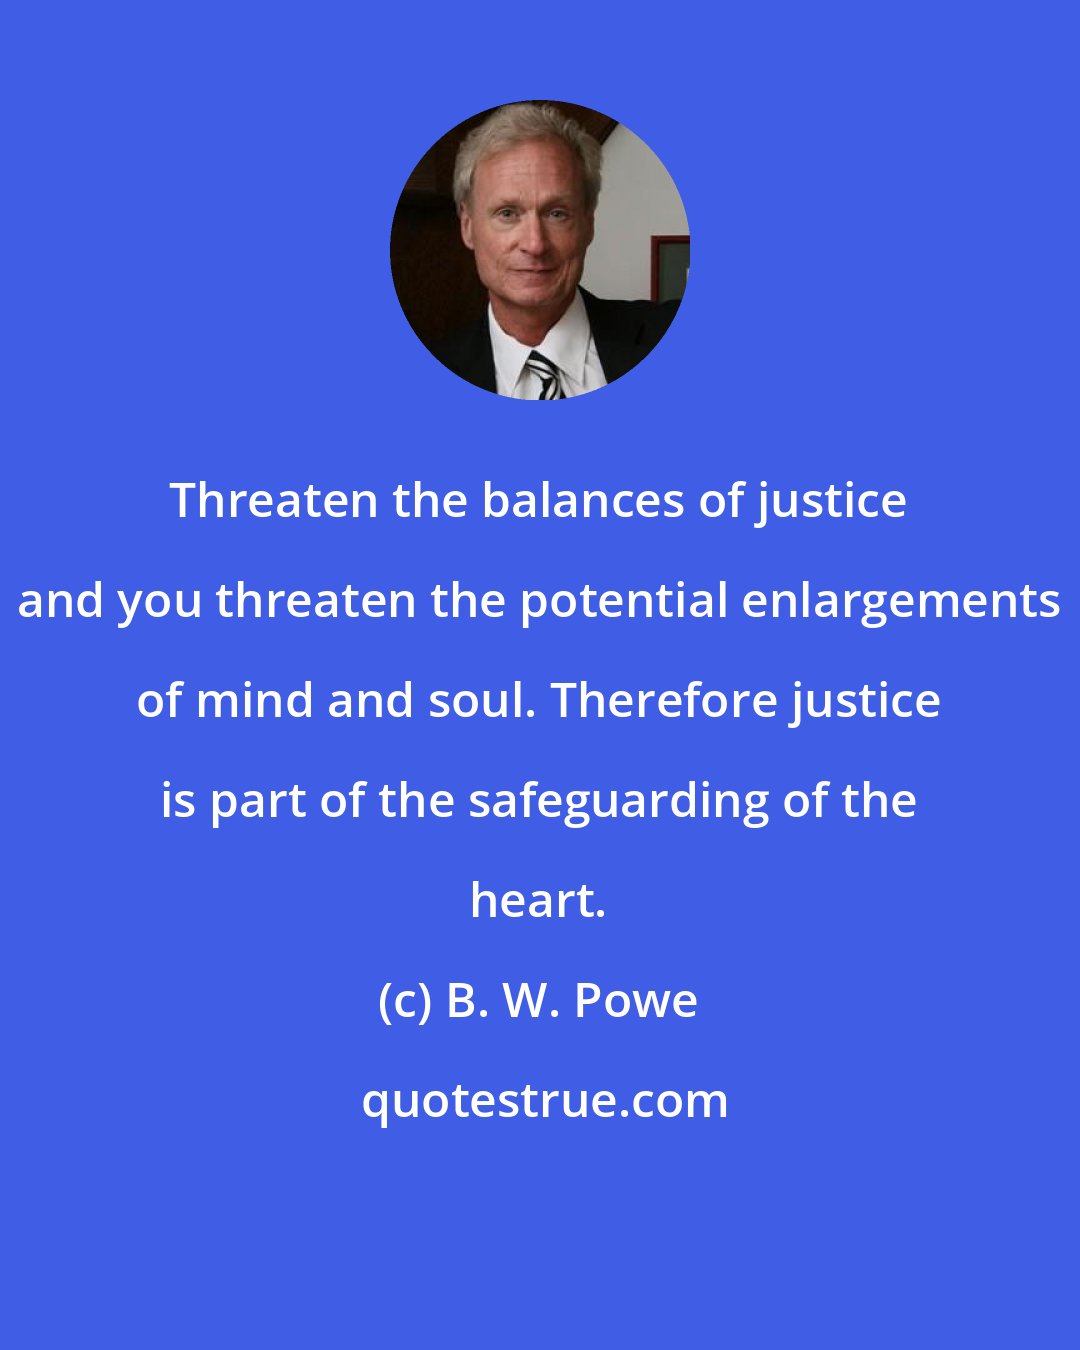 B. W. Powe: Threaten the balances of justice and you threaten the potential enlargements of mind and soul. Therefore justice is part of the safeguarding of the heart.